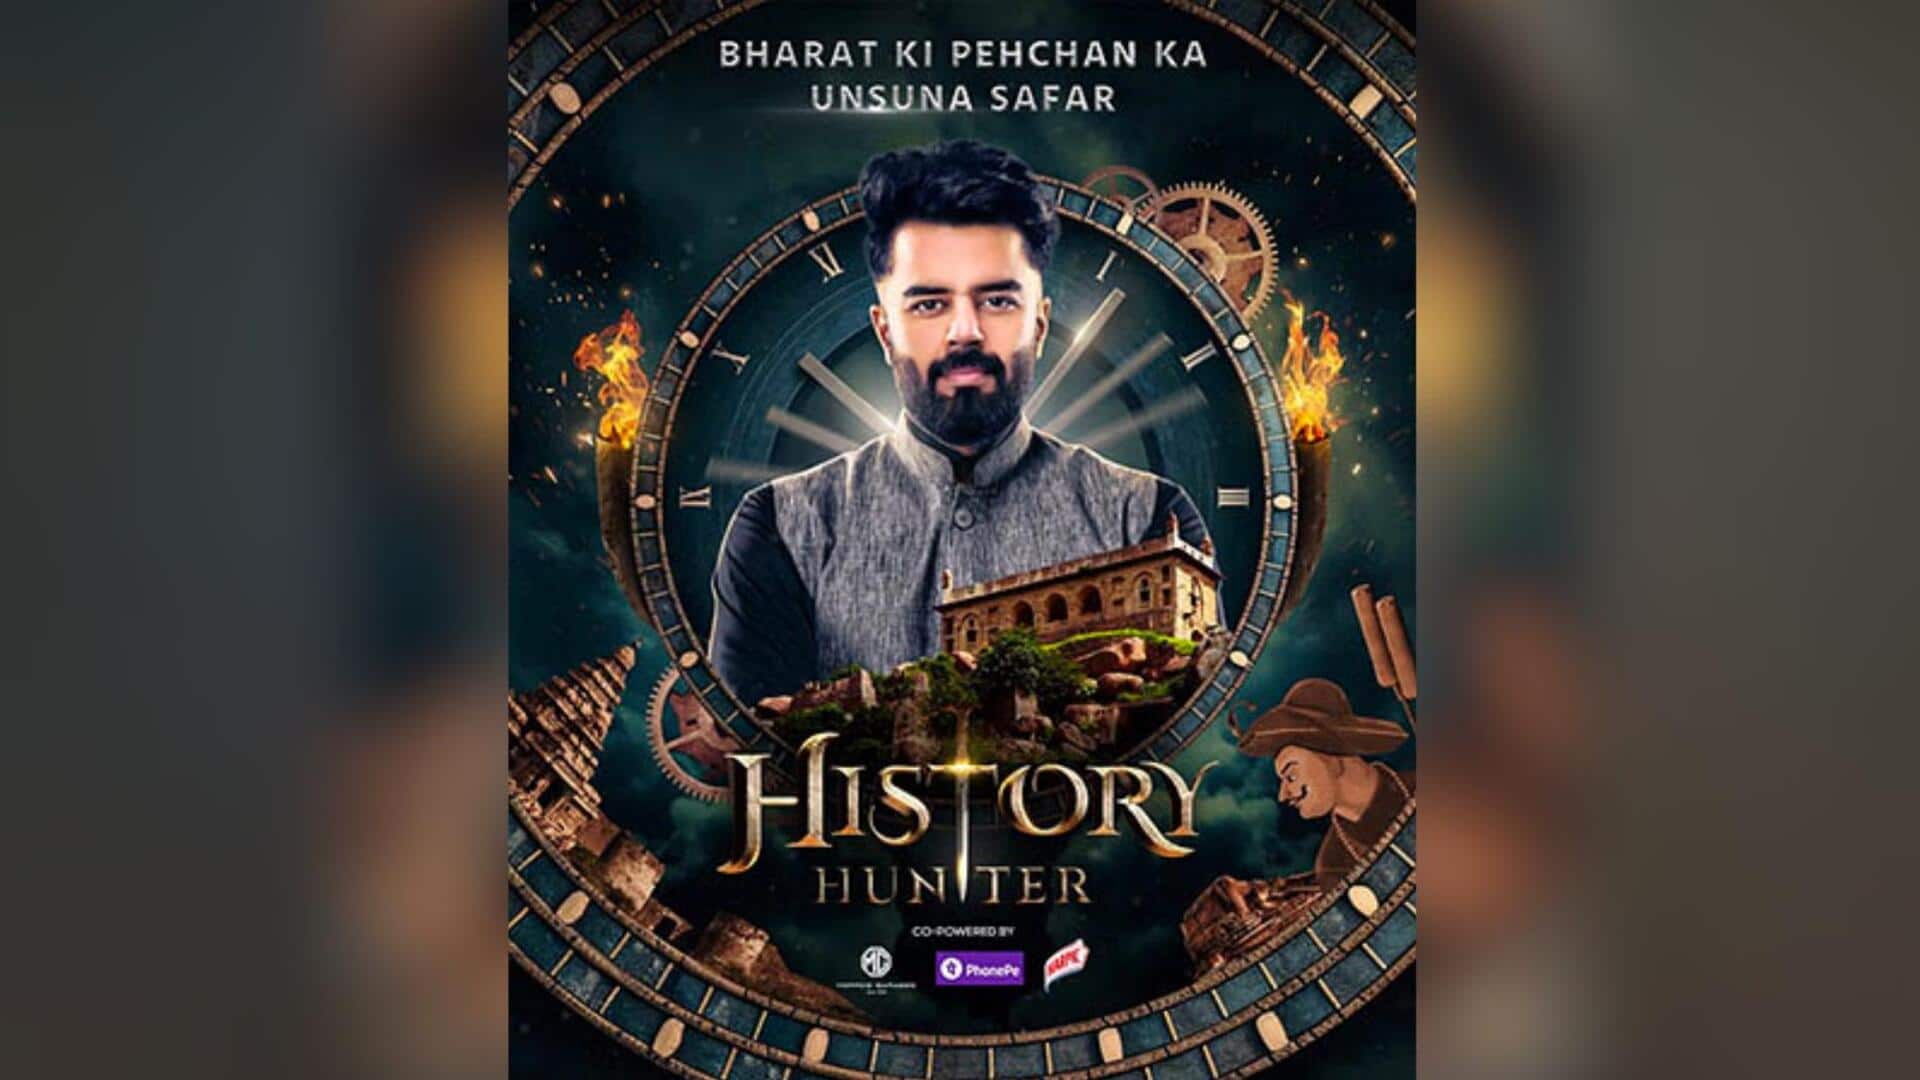 Maniesh Paul to unearth India's historical mysteries in 'History Hunter'